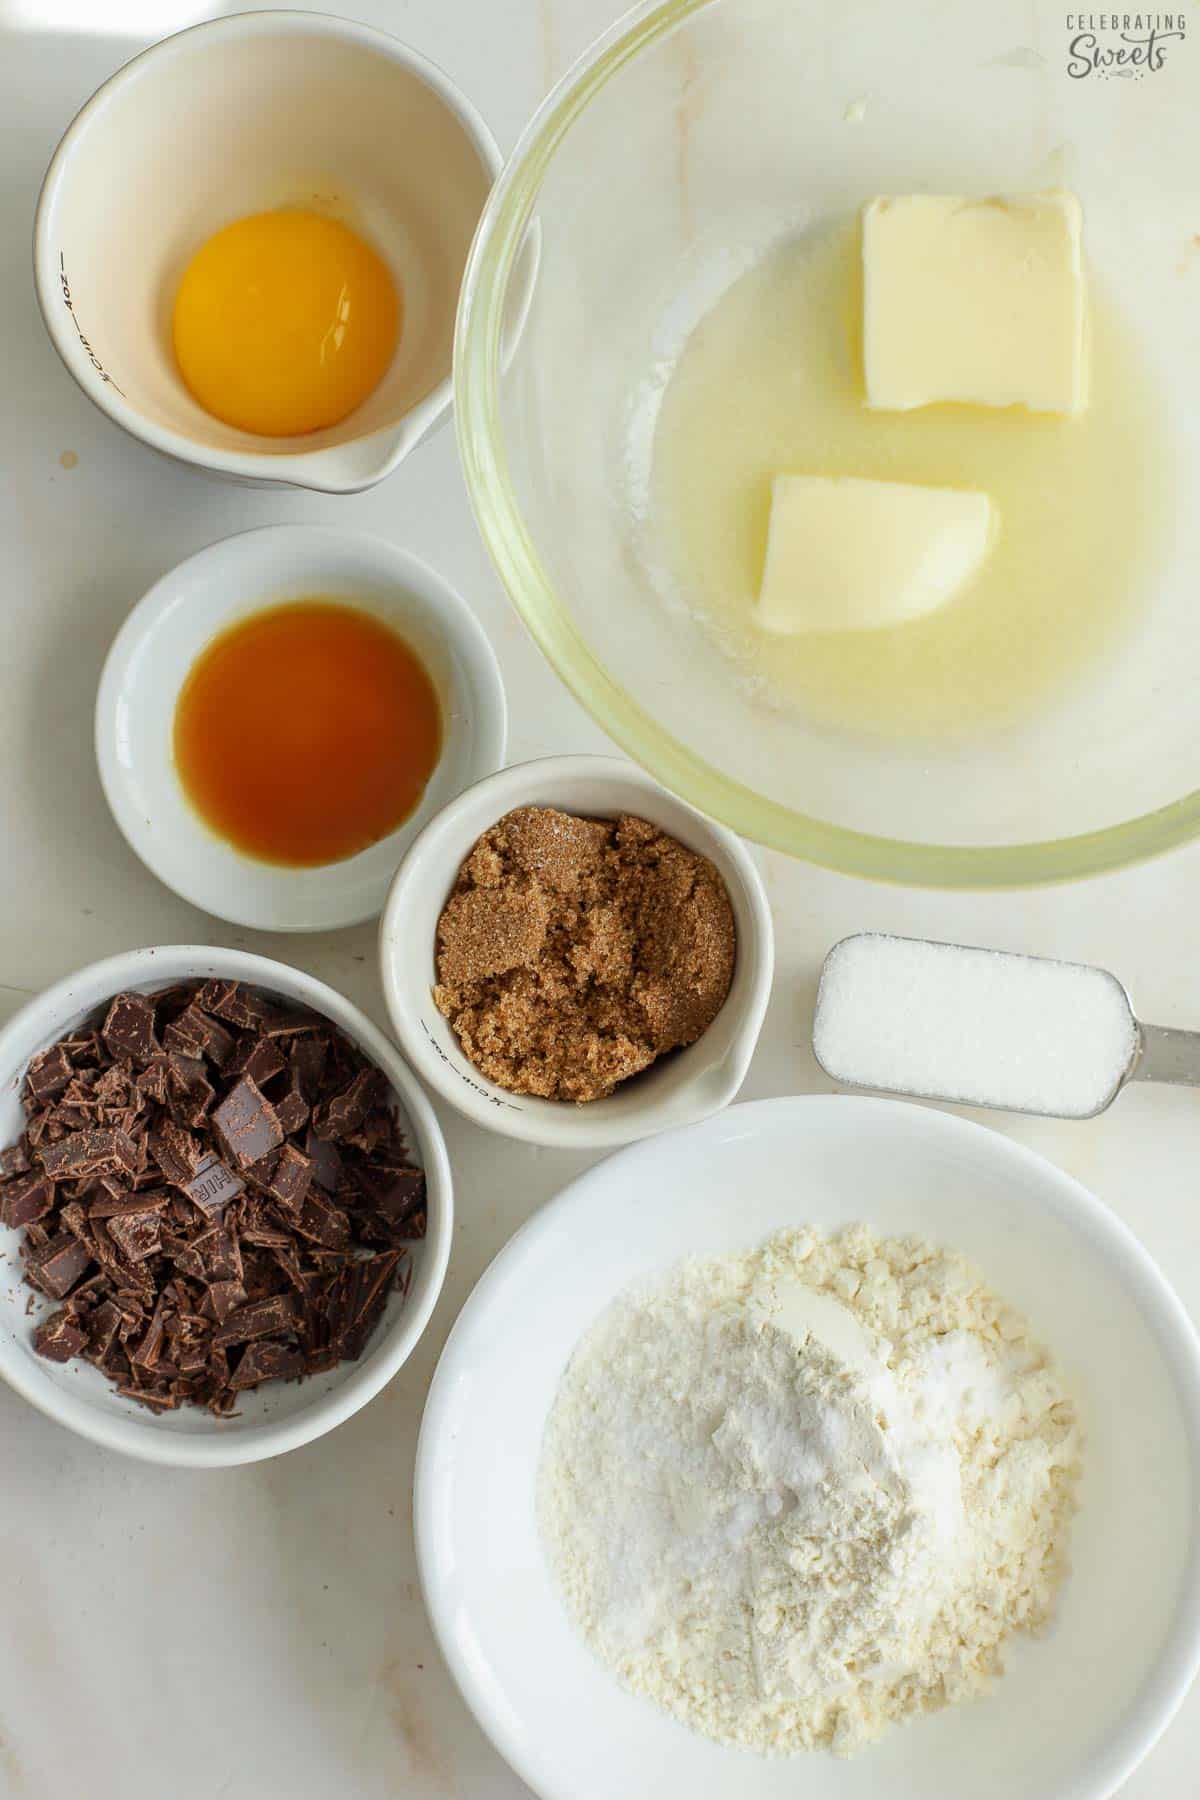 Ingredients for a single serve cookie: butter, egg yolk, sugars, flour, chocolate, vanilla.